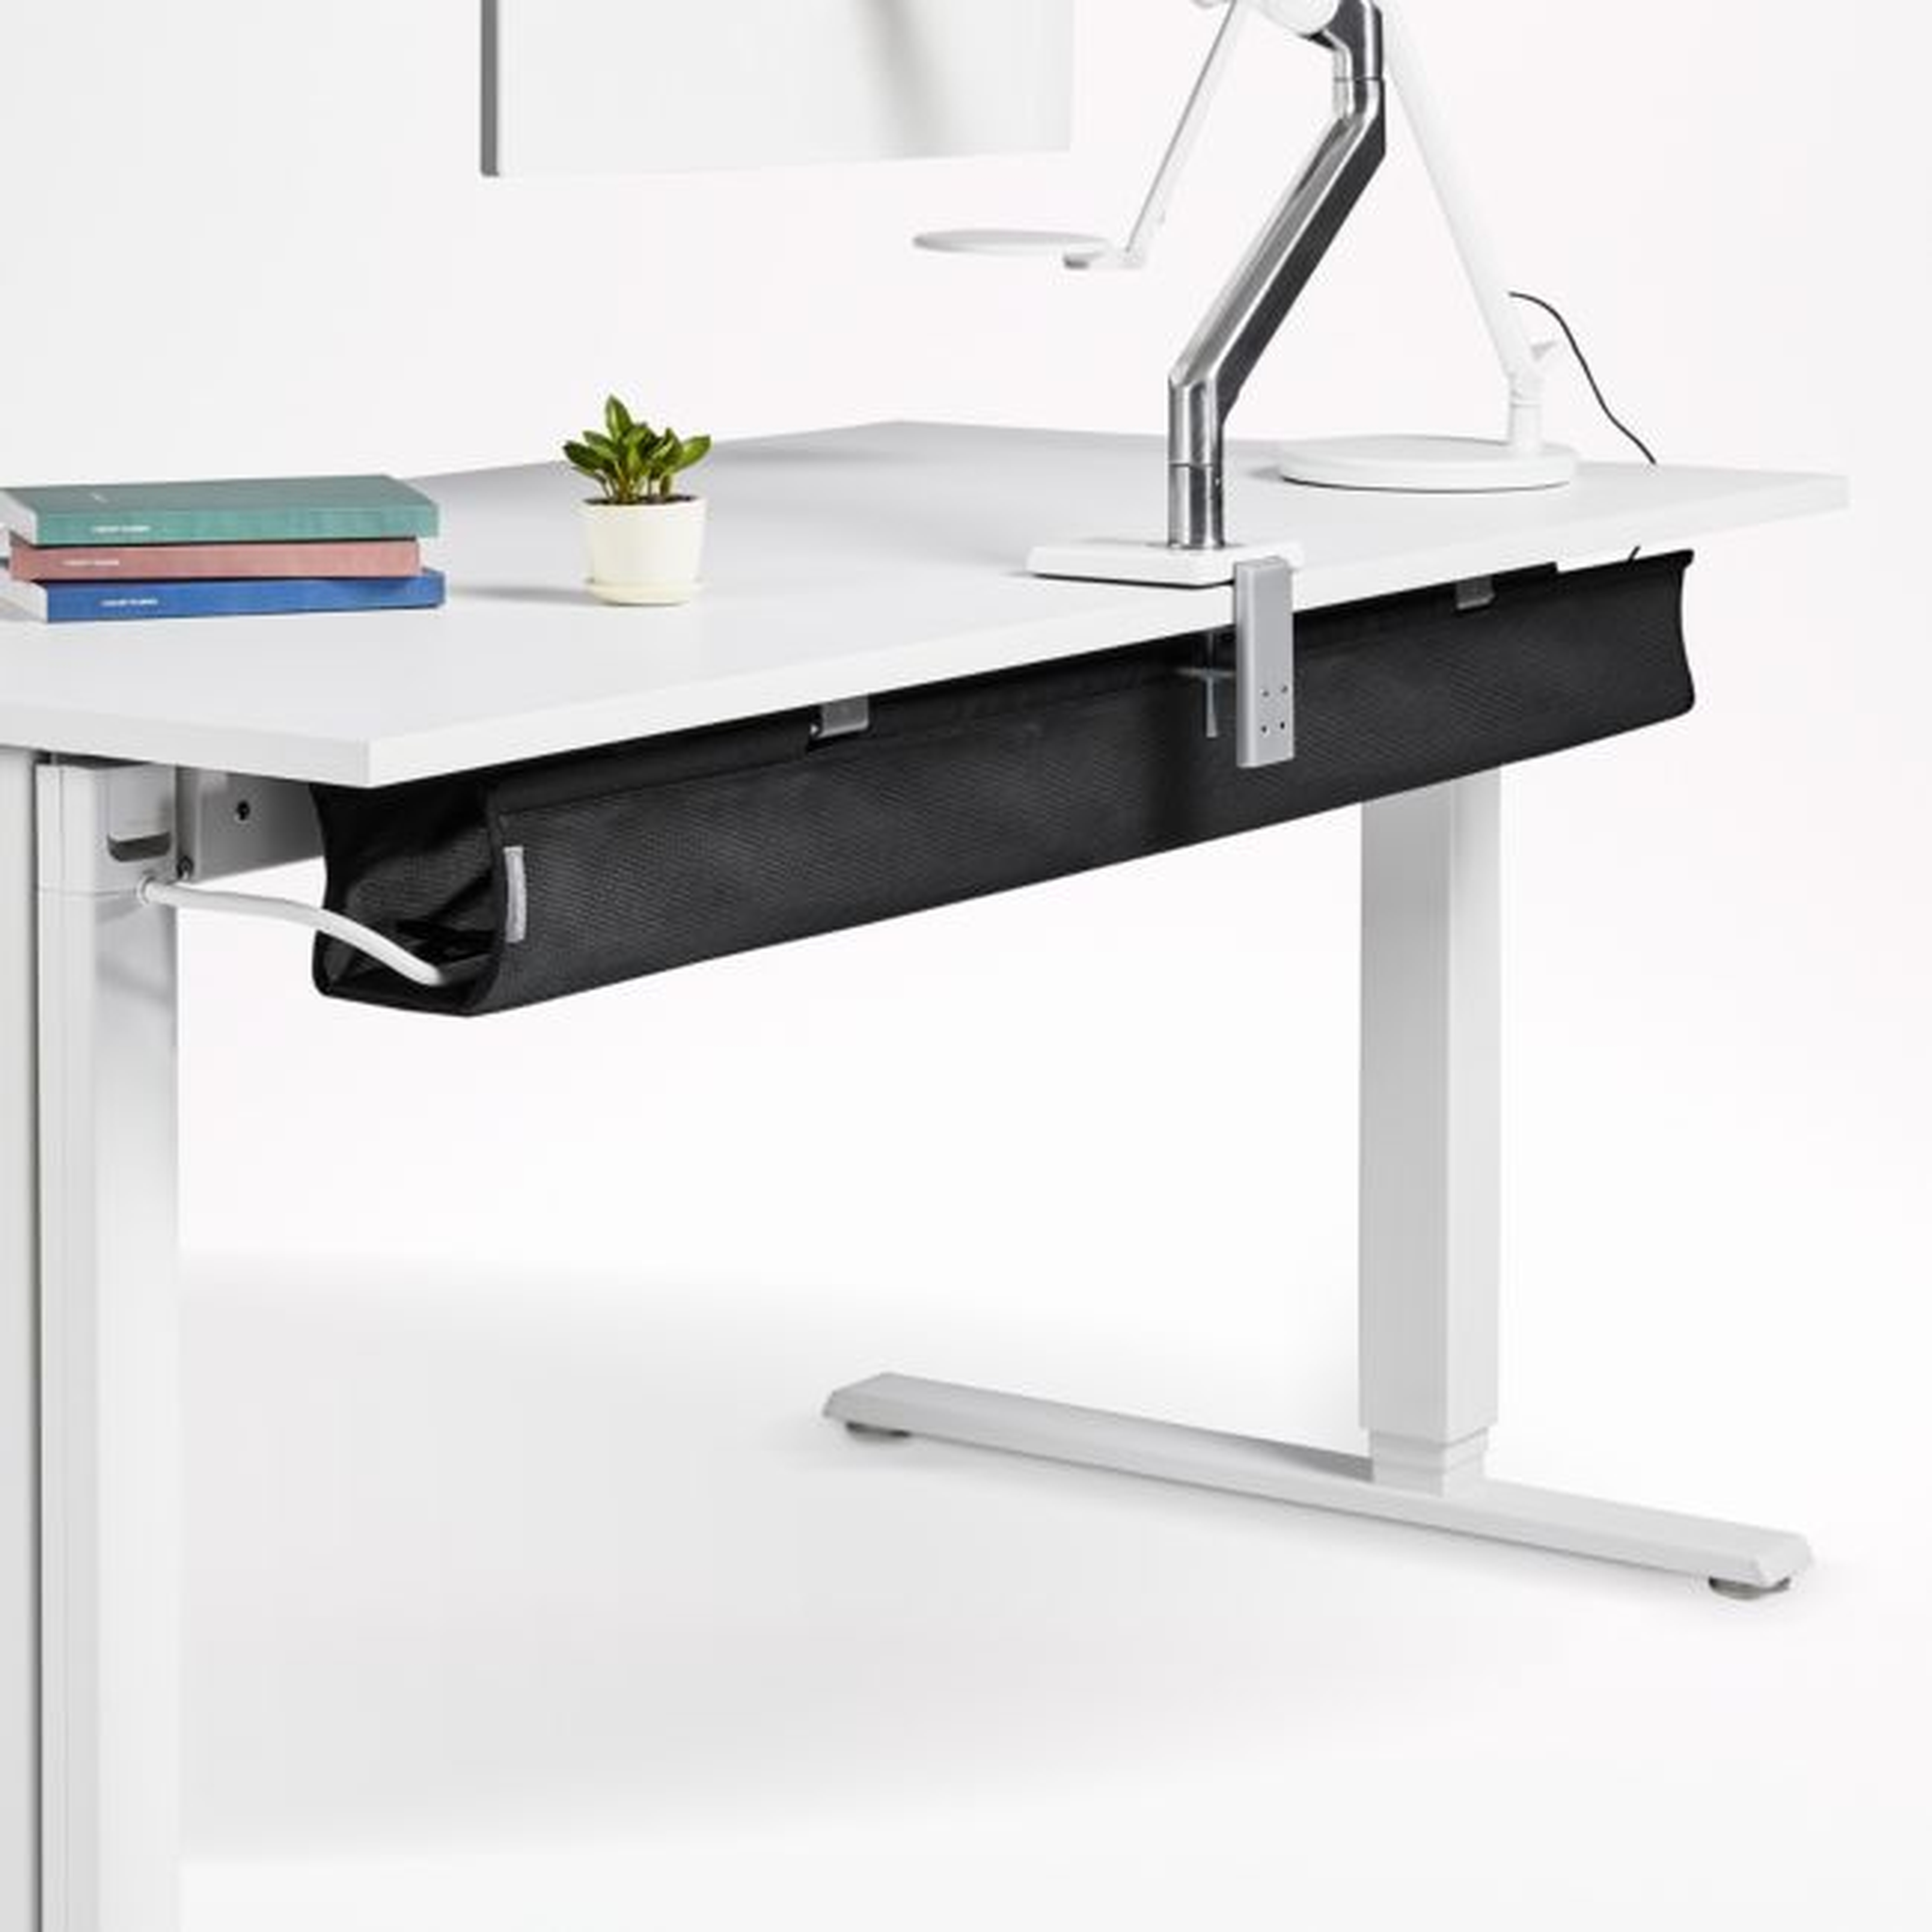 Humanscale ® NeatTech ™ Cable Organizer - Crate and Barrel